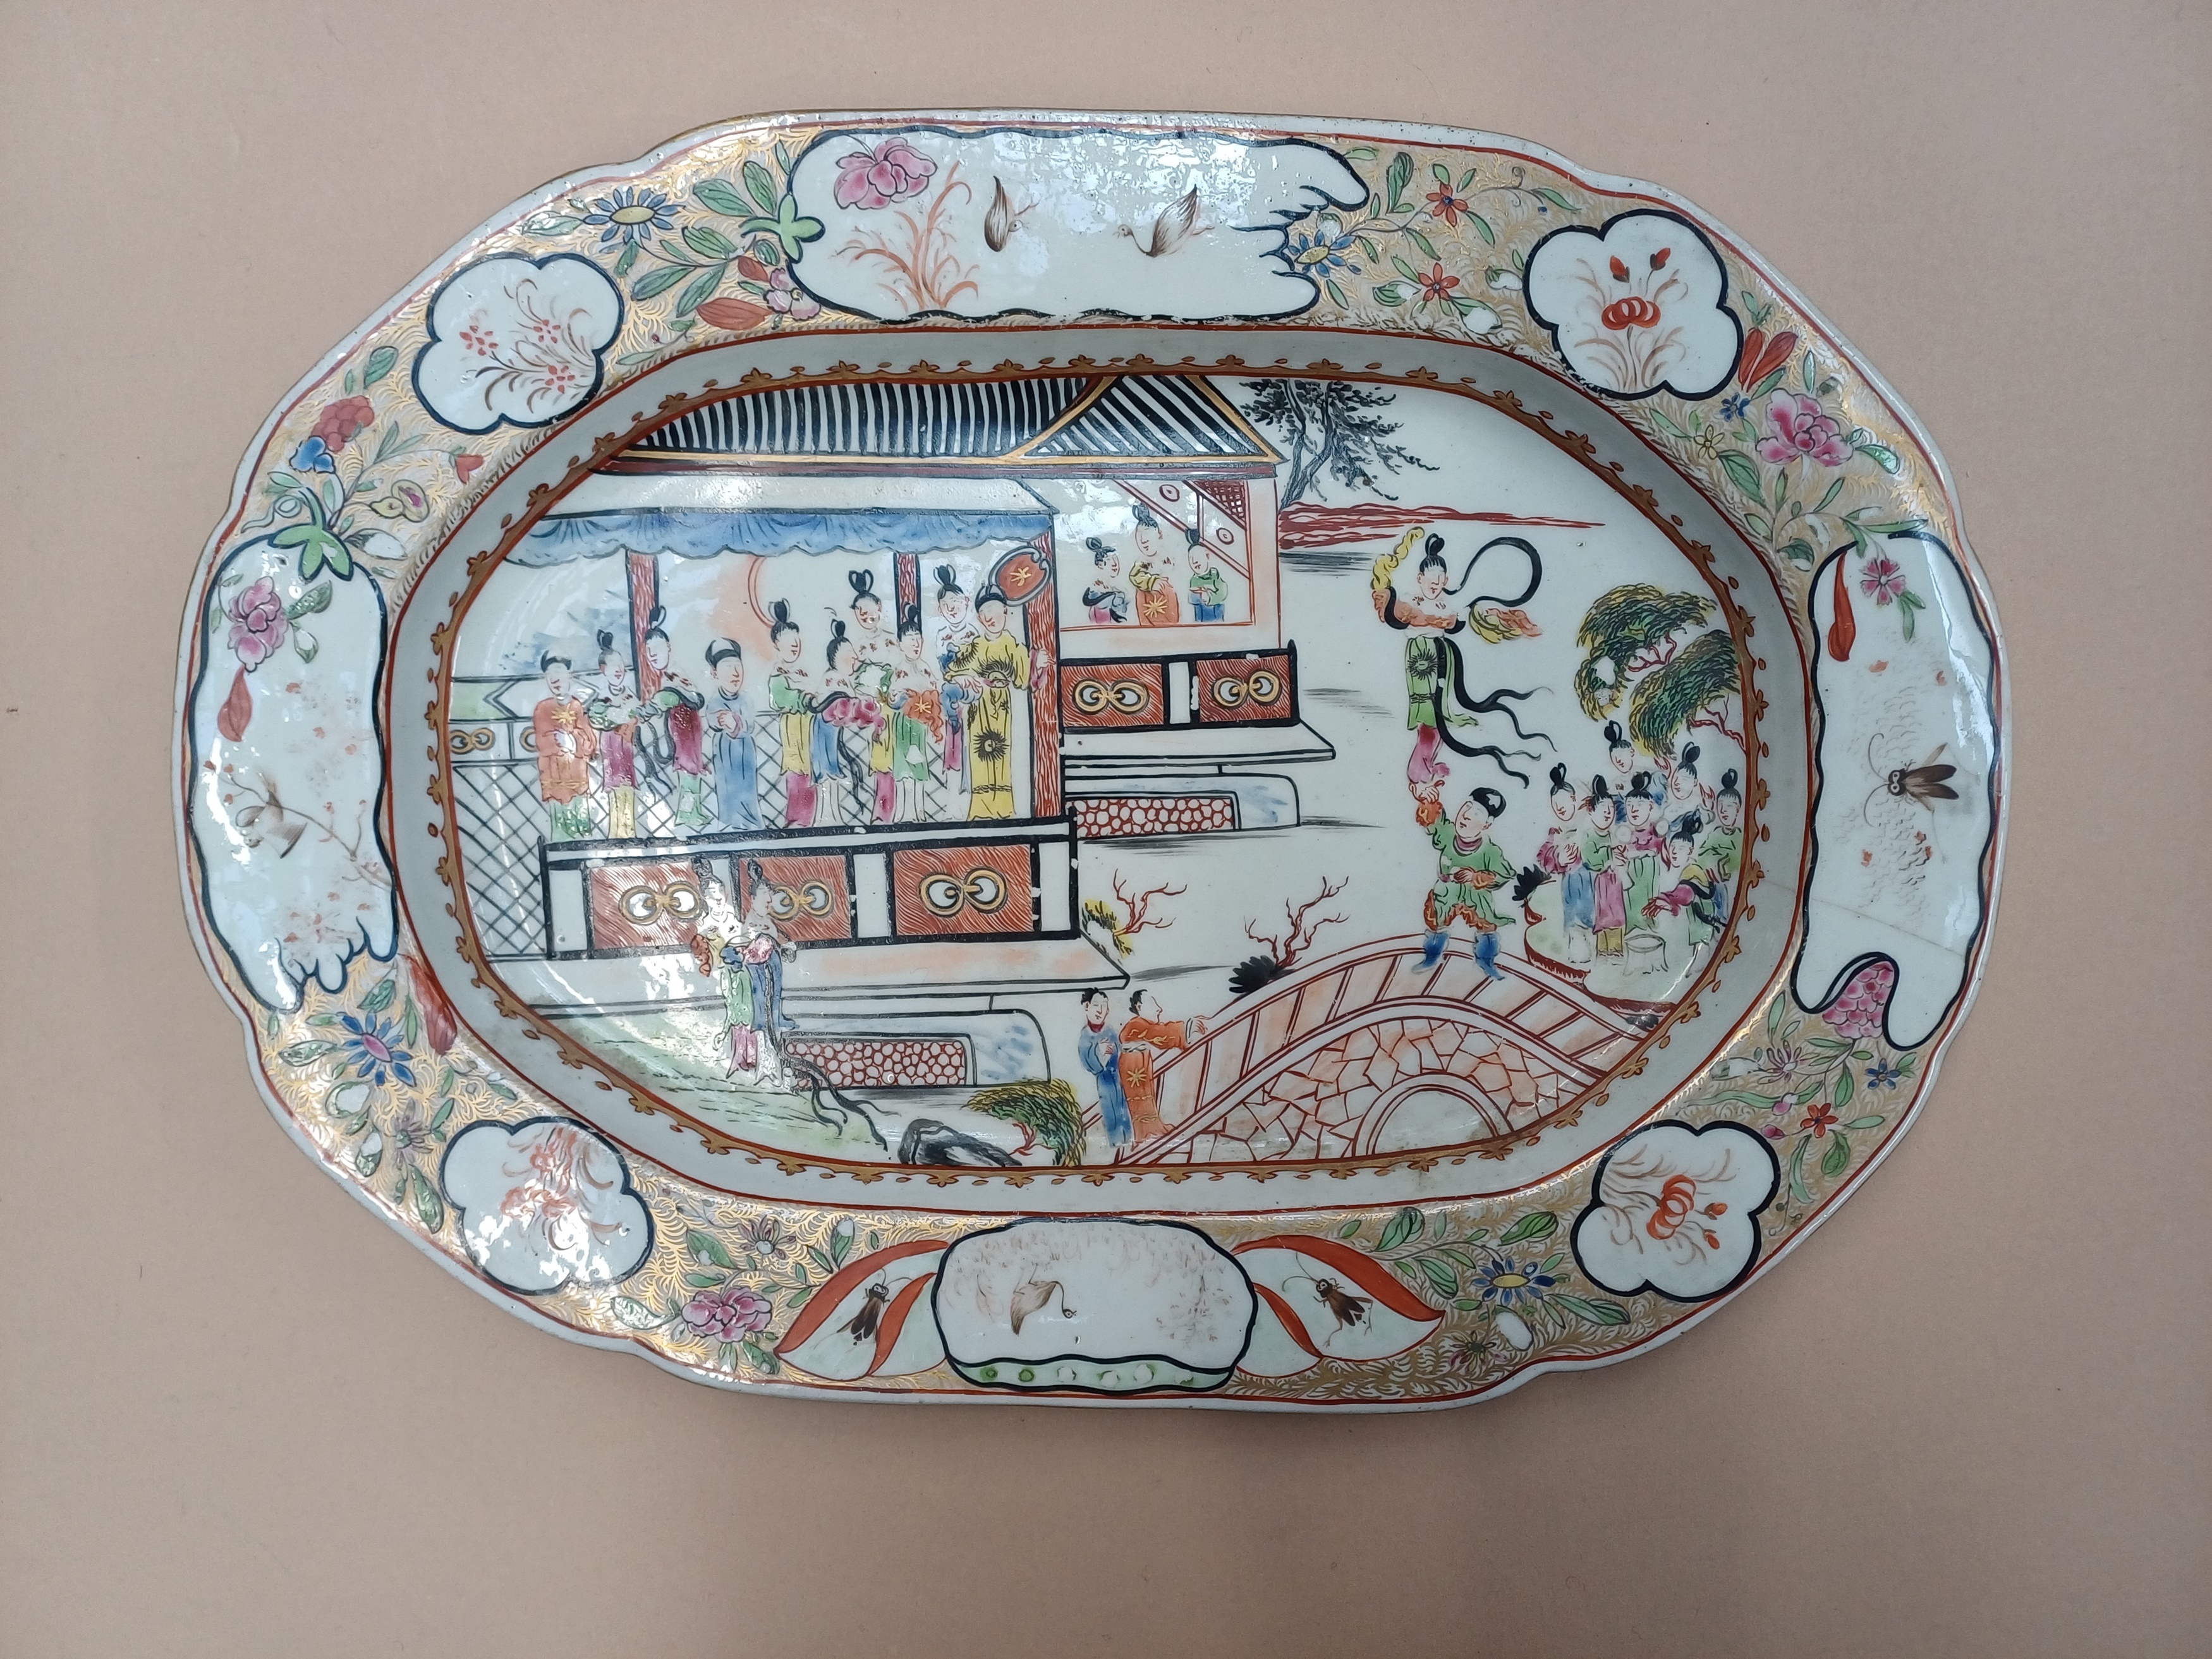 A PAIR OF CHINESE EXPORT FAMILLE-ROSE 'FIGURATIVE' DISHES 清雍正 外銷粉彩人物故事圖紋盤一對 - Image 13 of 18